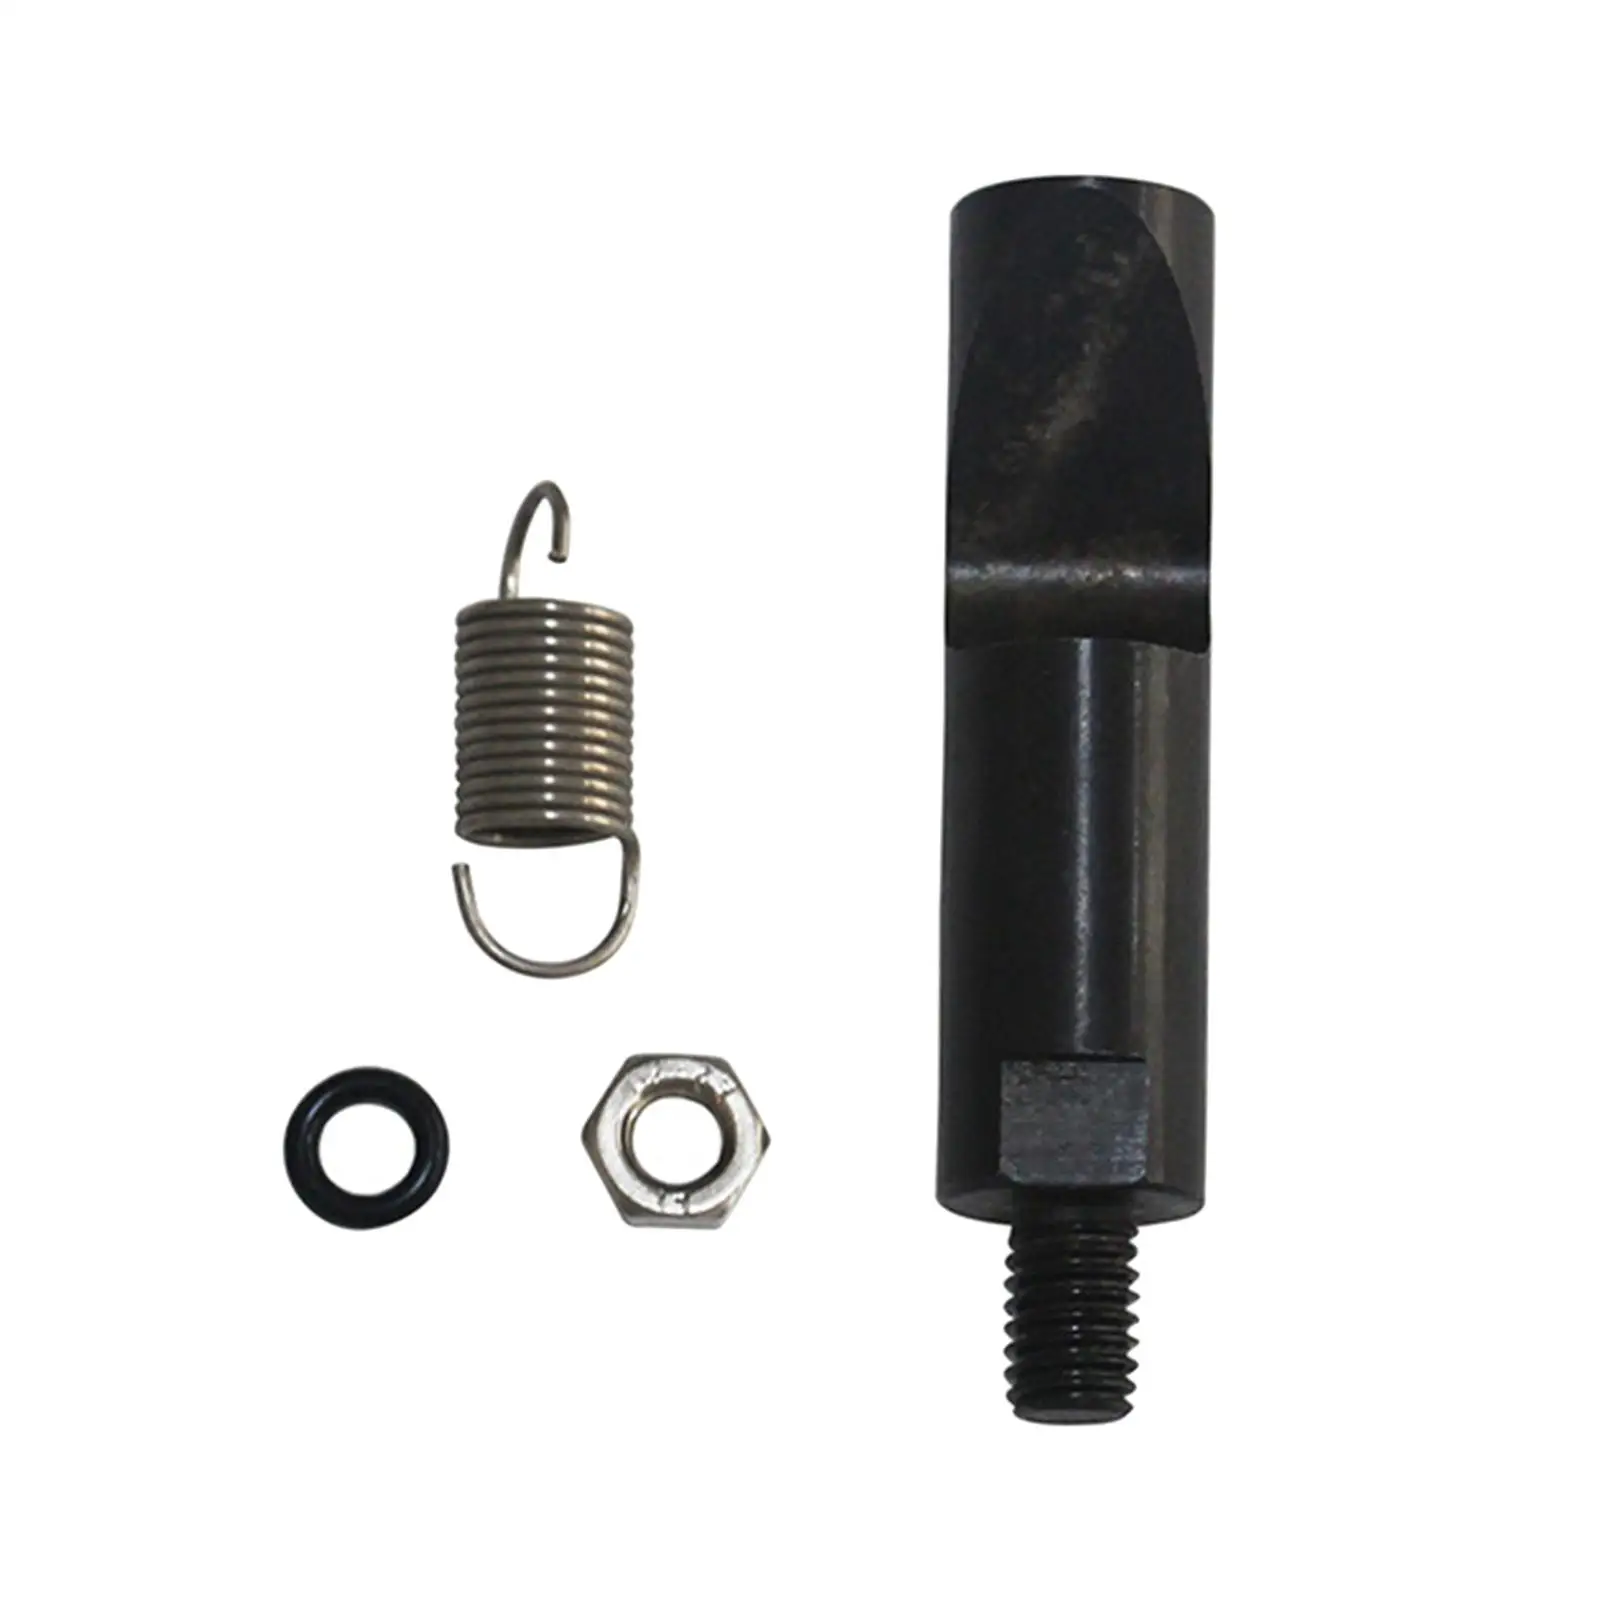 Fuel Pin Kit Durable Simple Installation Anti Wear Assembly Pump Governor Spring for Dodge Cummins 1988 to 1993 5.9L Sturdy